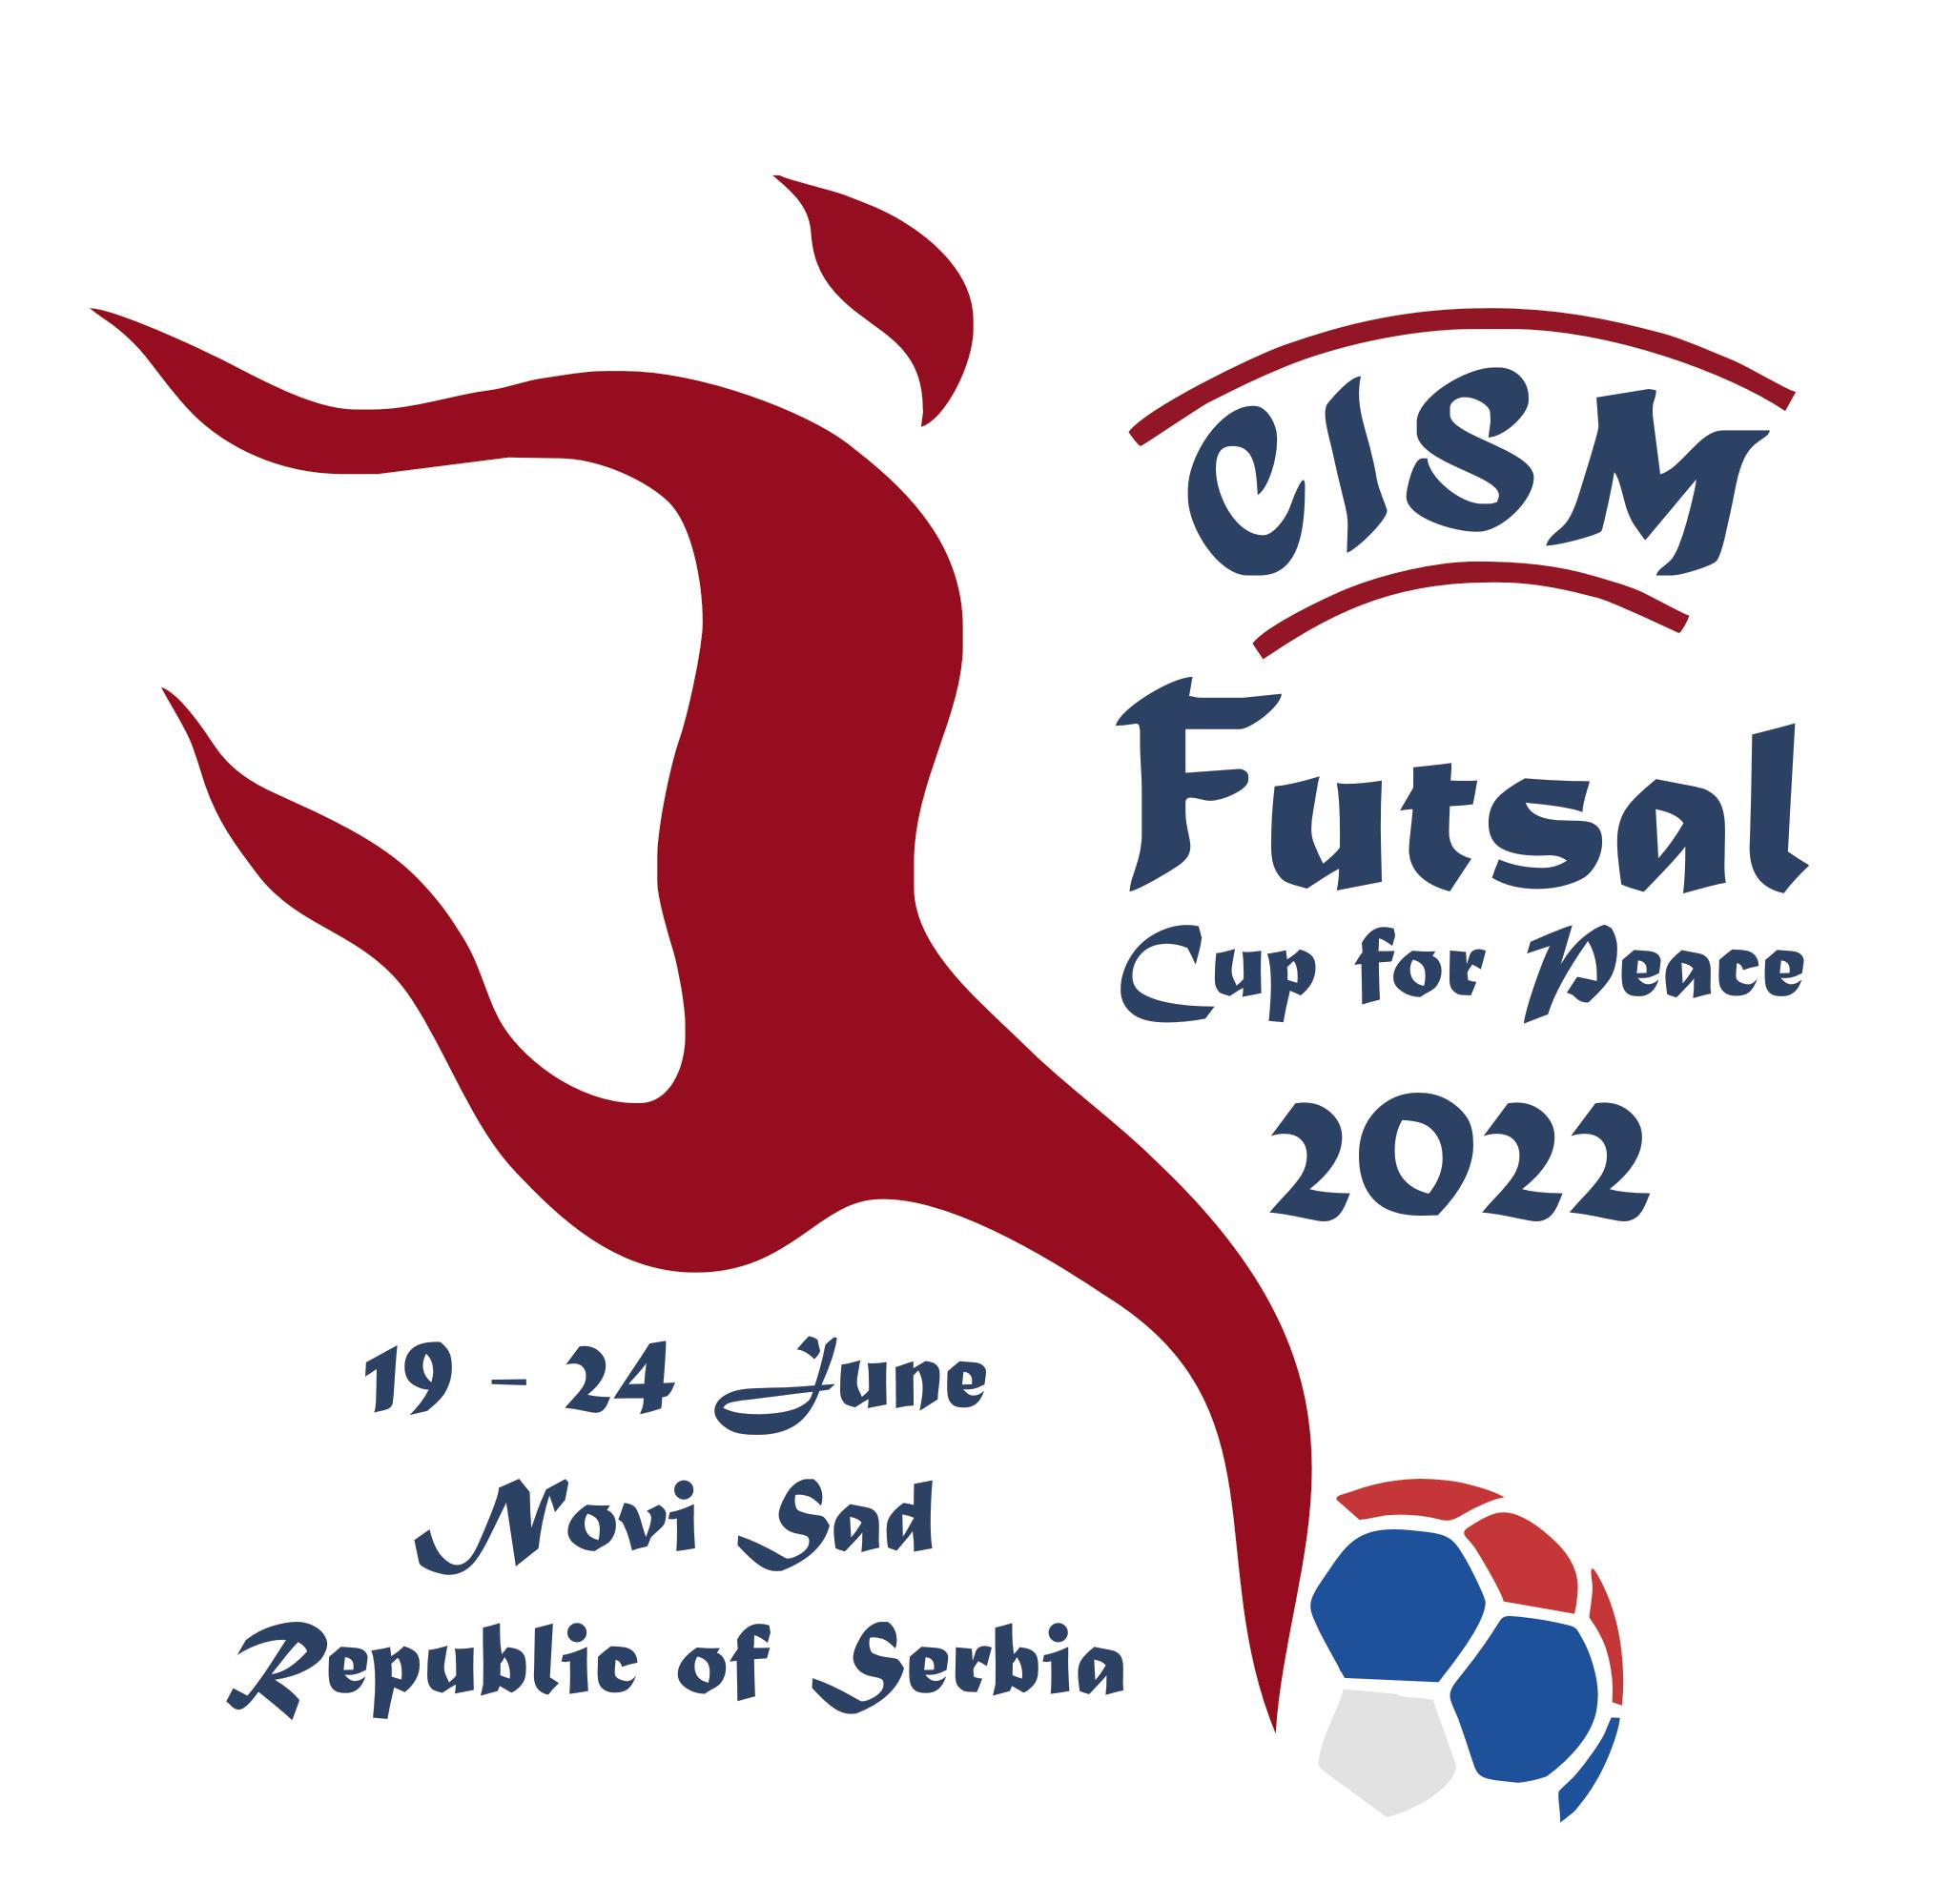 CISM Futsal Cup for Peace